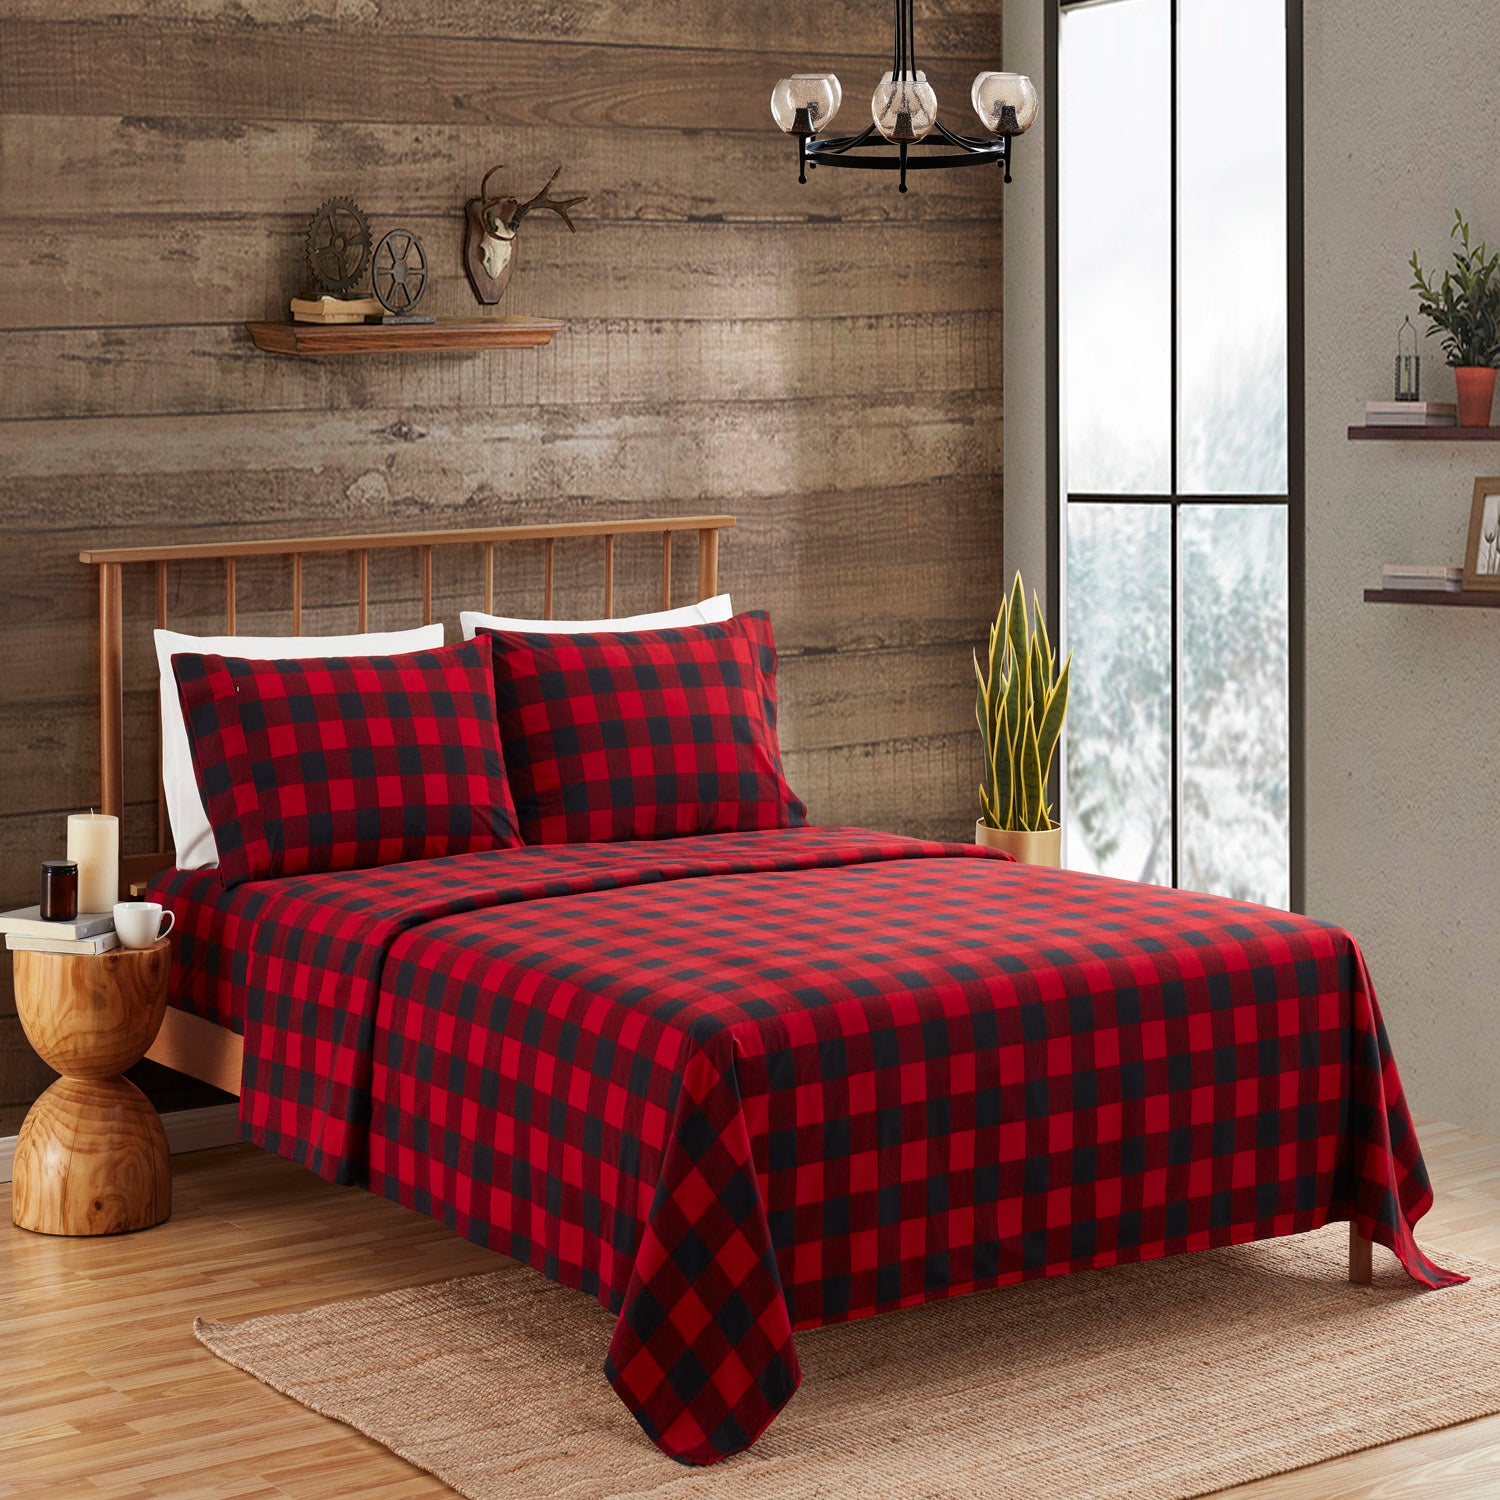 Printed Flannel 4-Piece Sheet Set, Buffalo Check - Bed